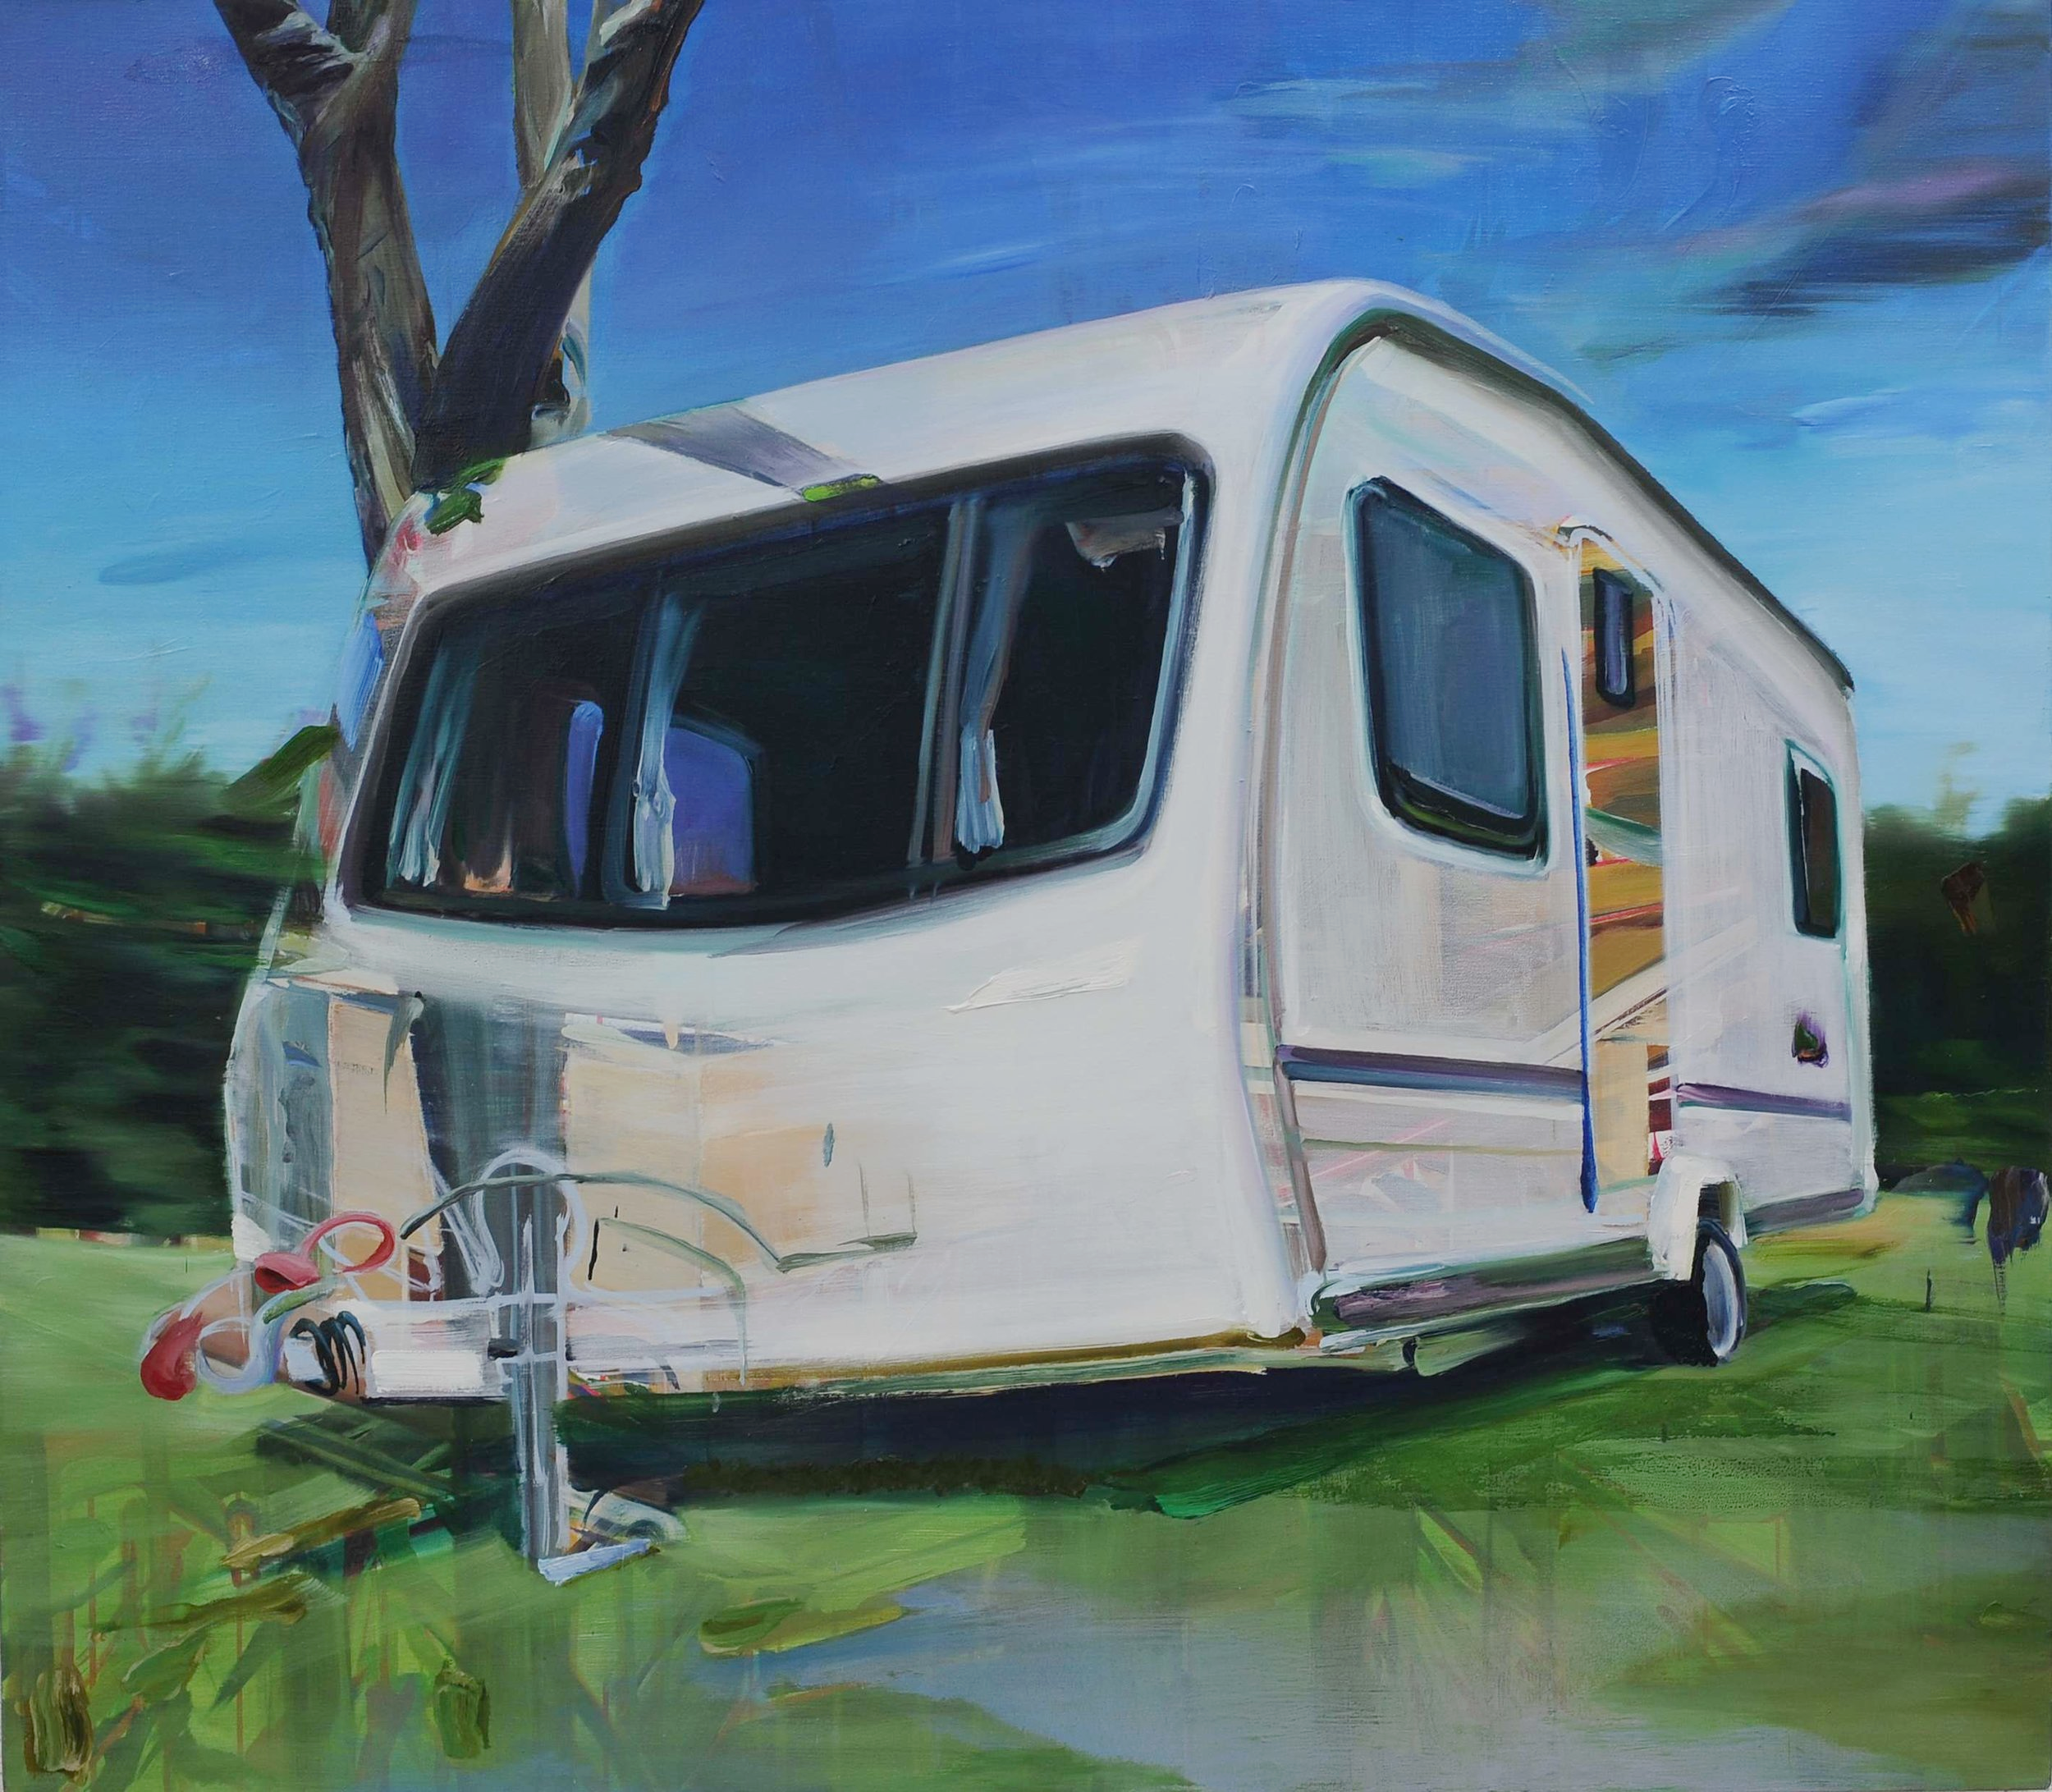   Untitled (Mobile Home) , 2009, oil on canvas, 140 x 160cm. Private collection, Switzerland 